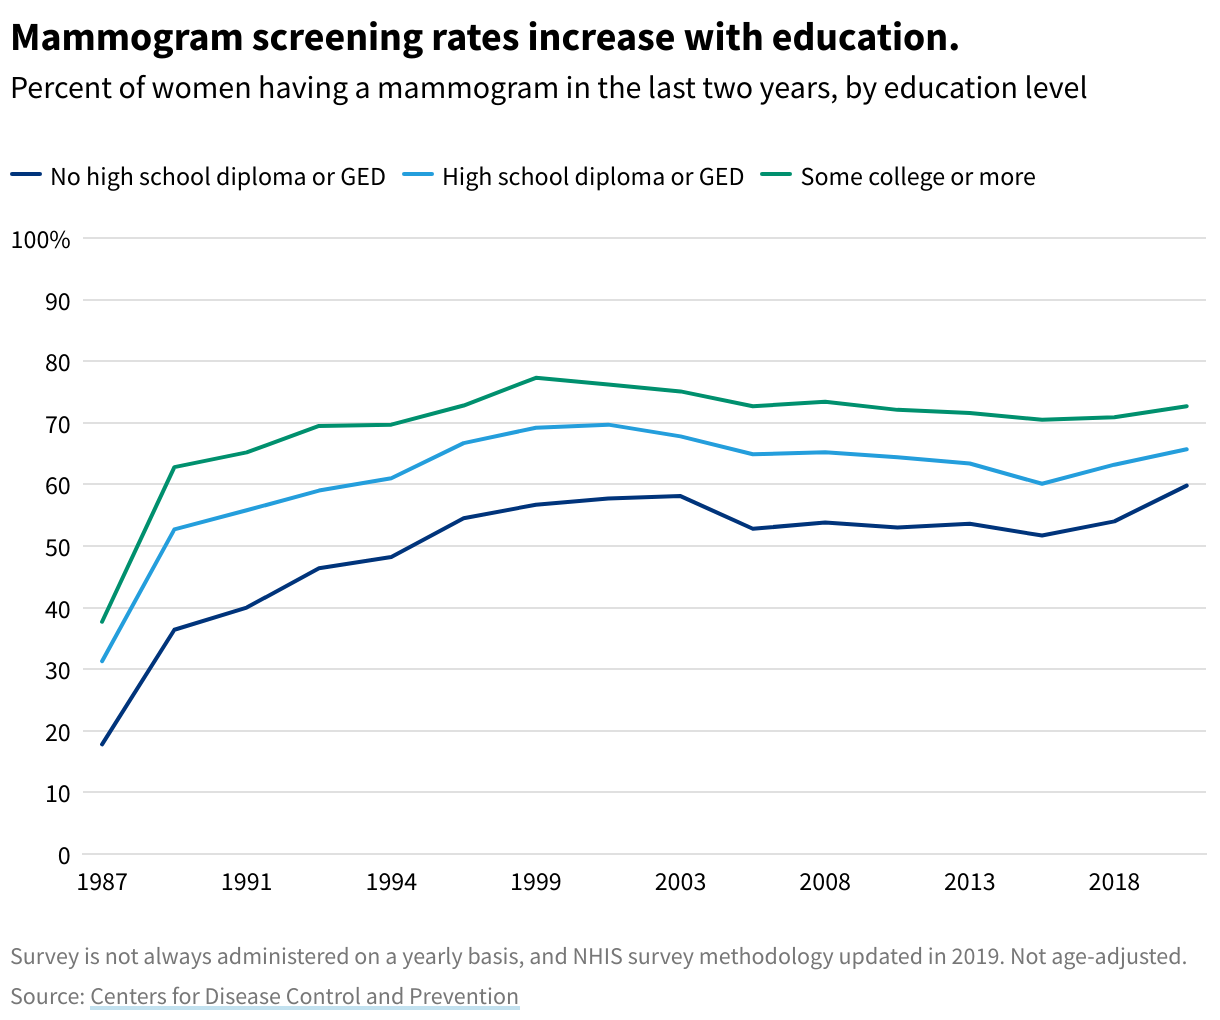 Line chart showing the rates of women who have had a mammogram screening in the last two years, broken out by level of education. Three lines represent women without a high school diploma or GED, women with a high school diploma or GED, and women with some college education or more. 